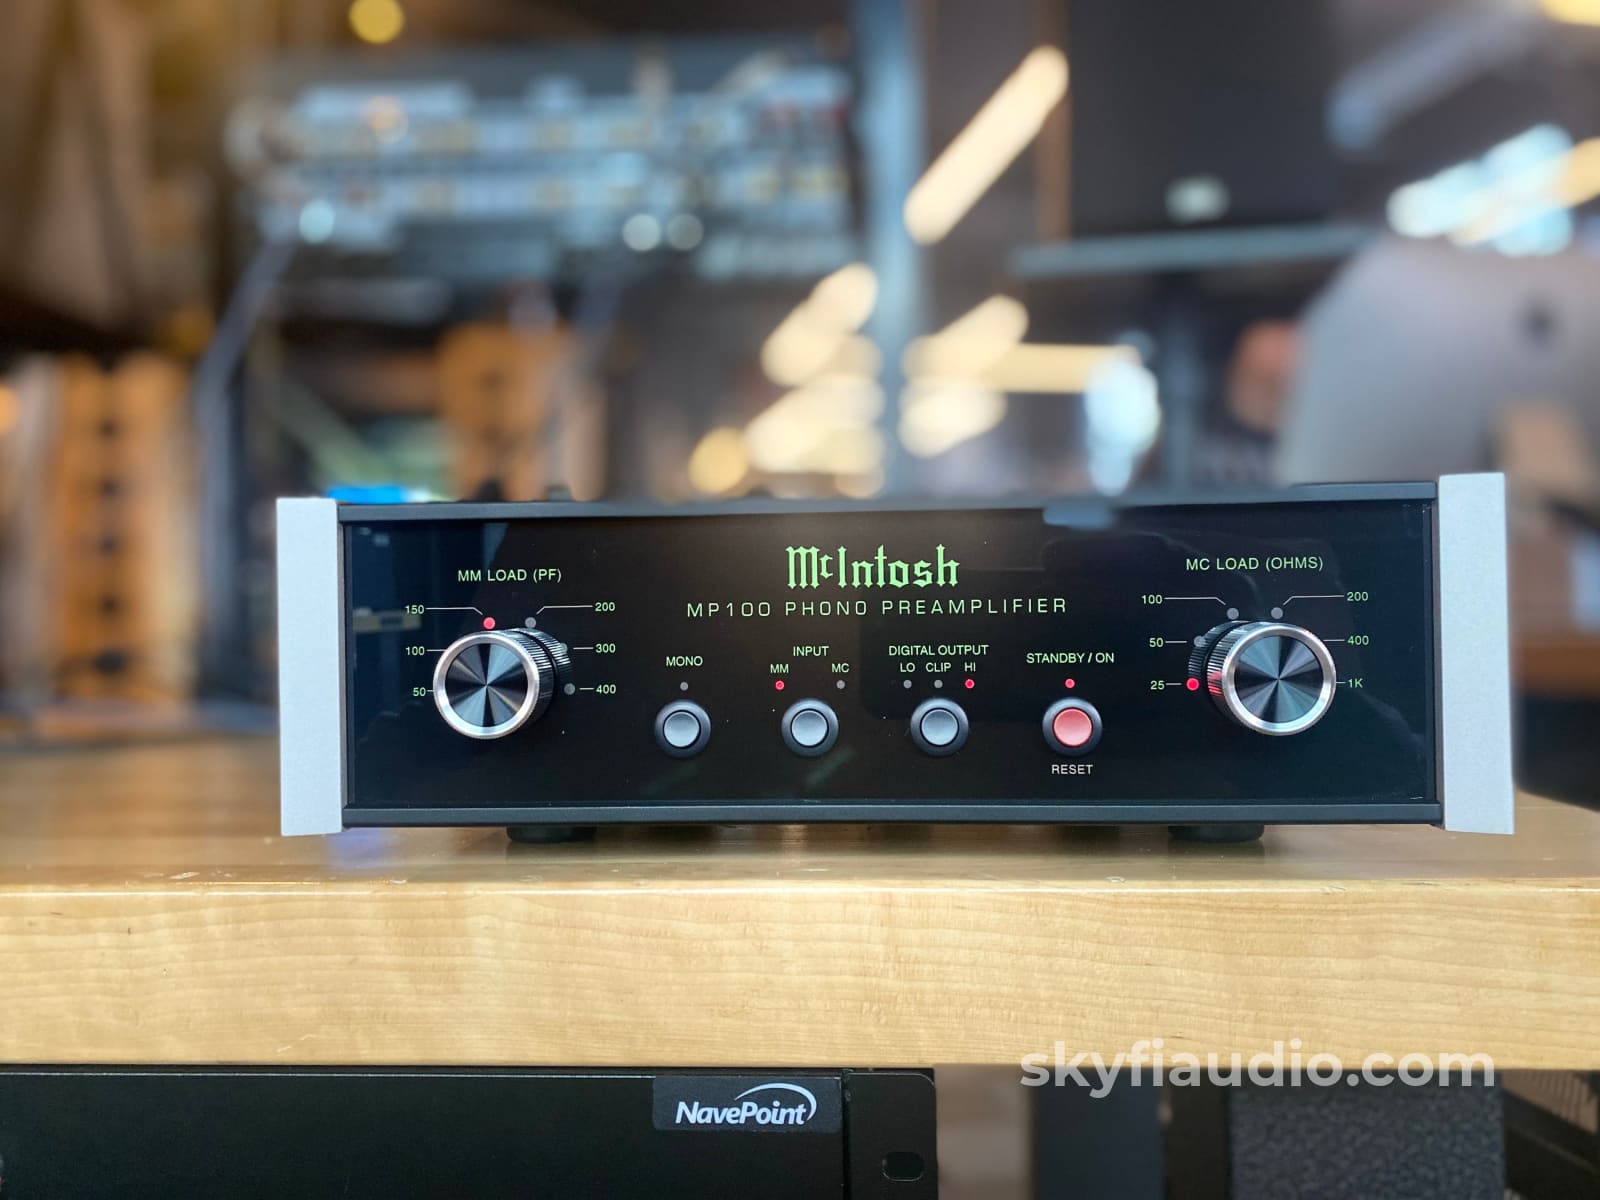 Mcintosh Mp100 Mc And Mm Phono Preamplifier - In Store Only